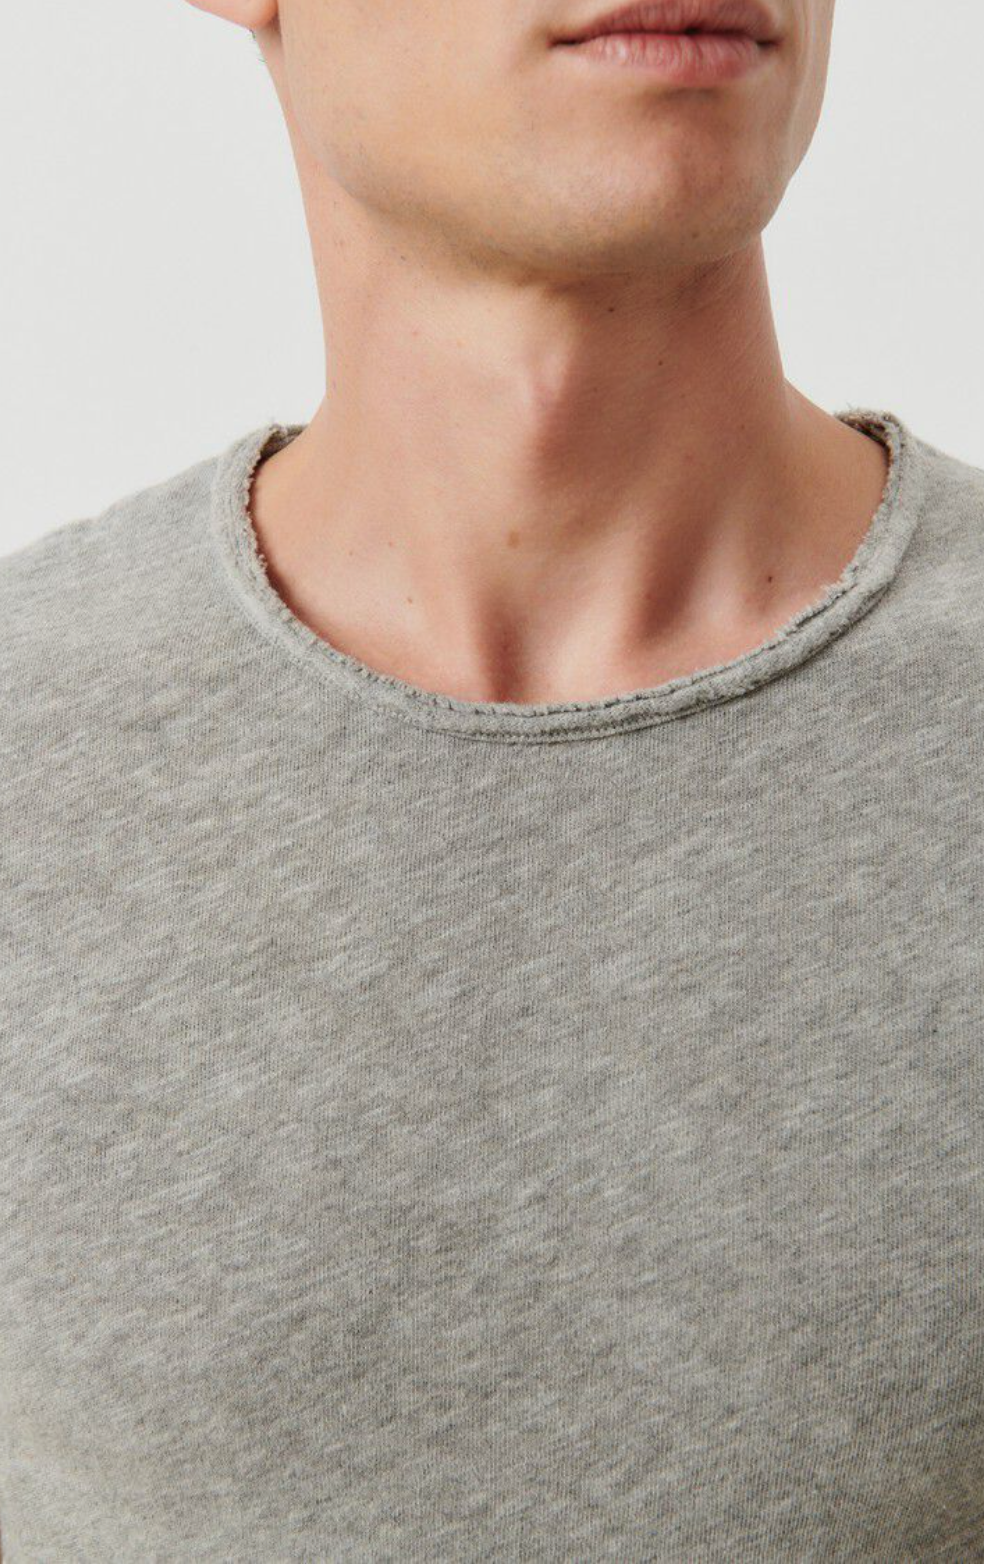 A close up neckline detail image of a male wearing the sonoma tee shirt in grey